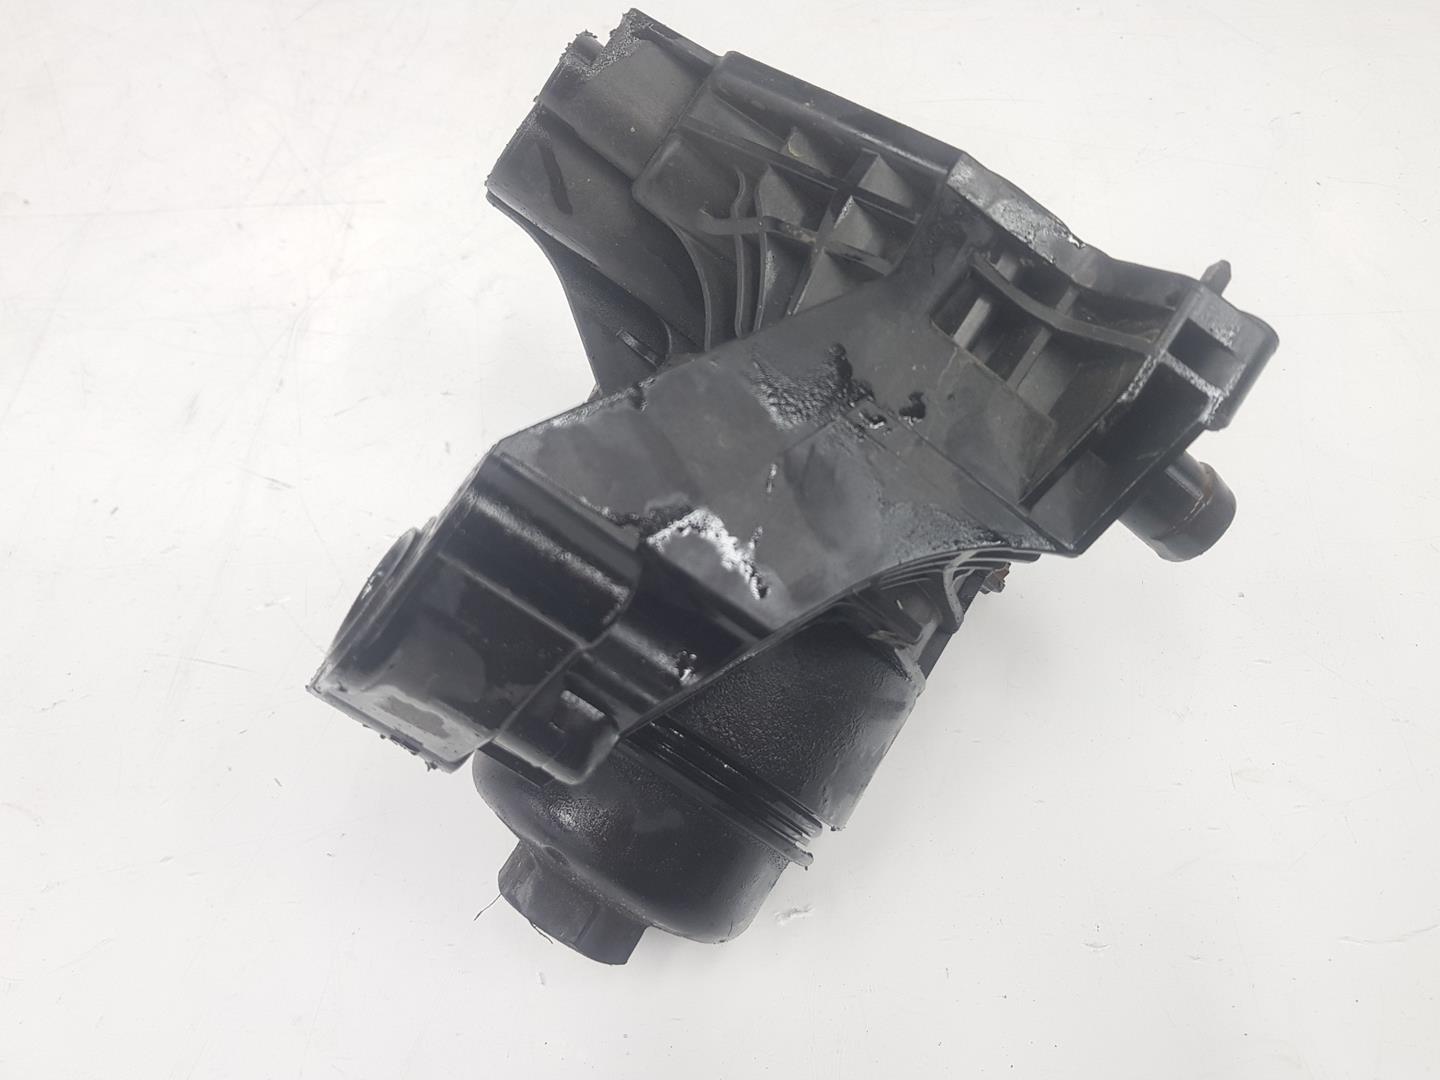 SEAT Leon 3 generation (2012-2020) Other Engine Compartment Parts 03N115389A, 1151CB2222DL 22485157